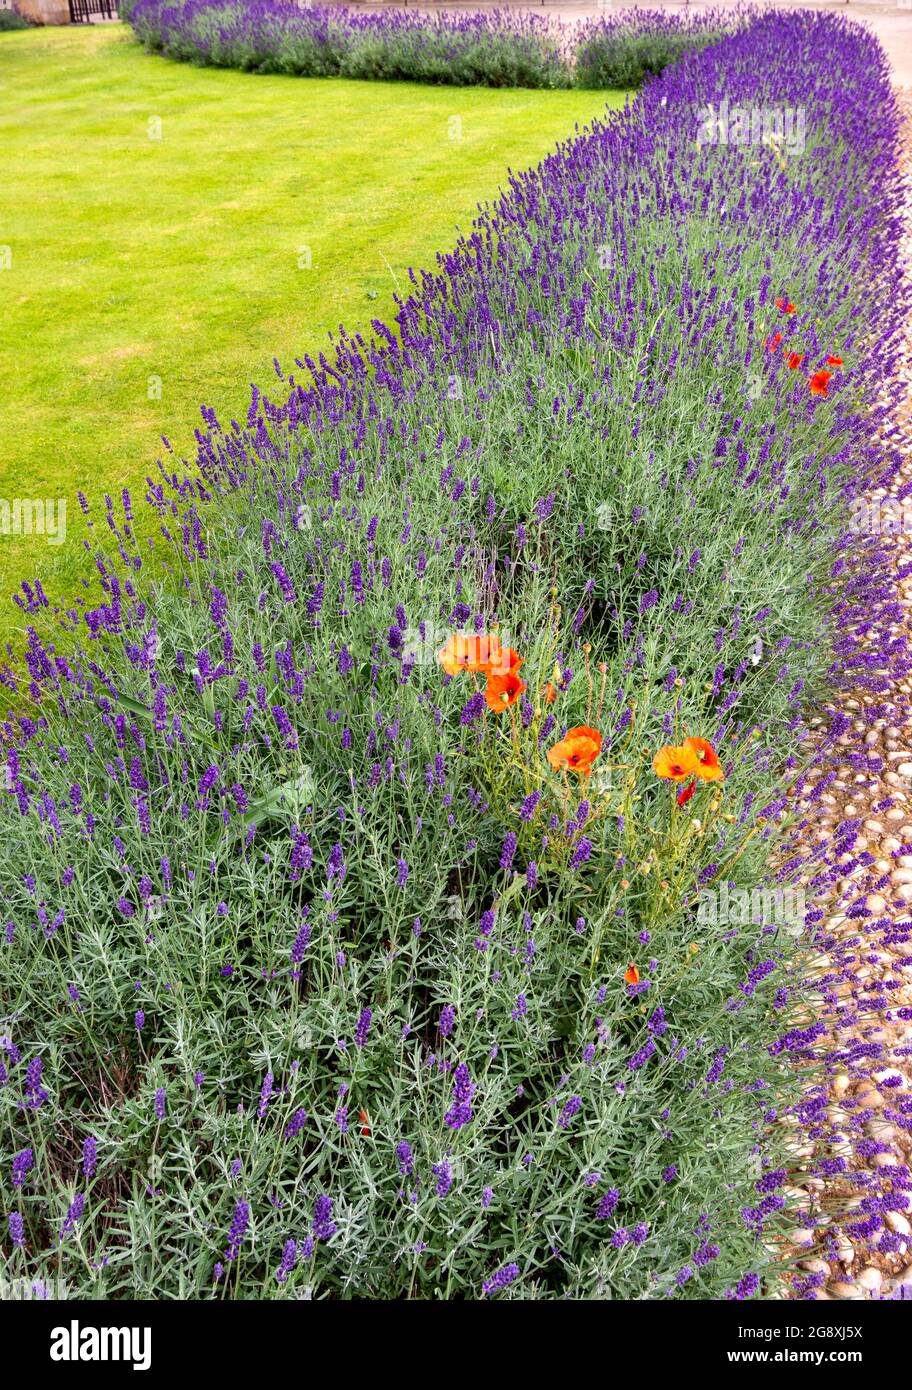 CAMBRIDGE ENGLAND KING'S COLLEGE CHAPEL LAVENDER BED AND RED POPPIES IN SUMMER Stock Photo